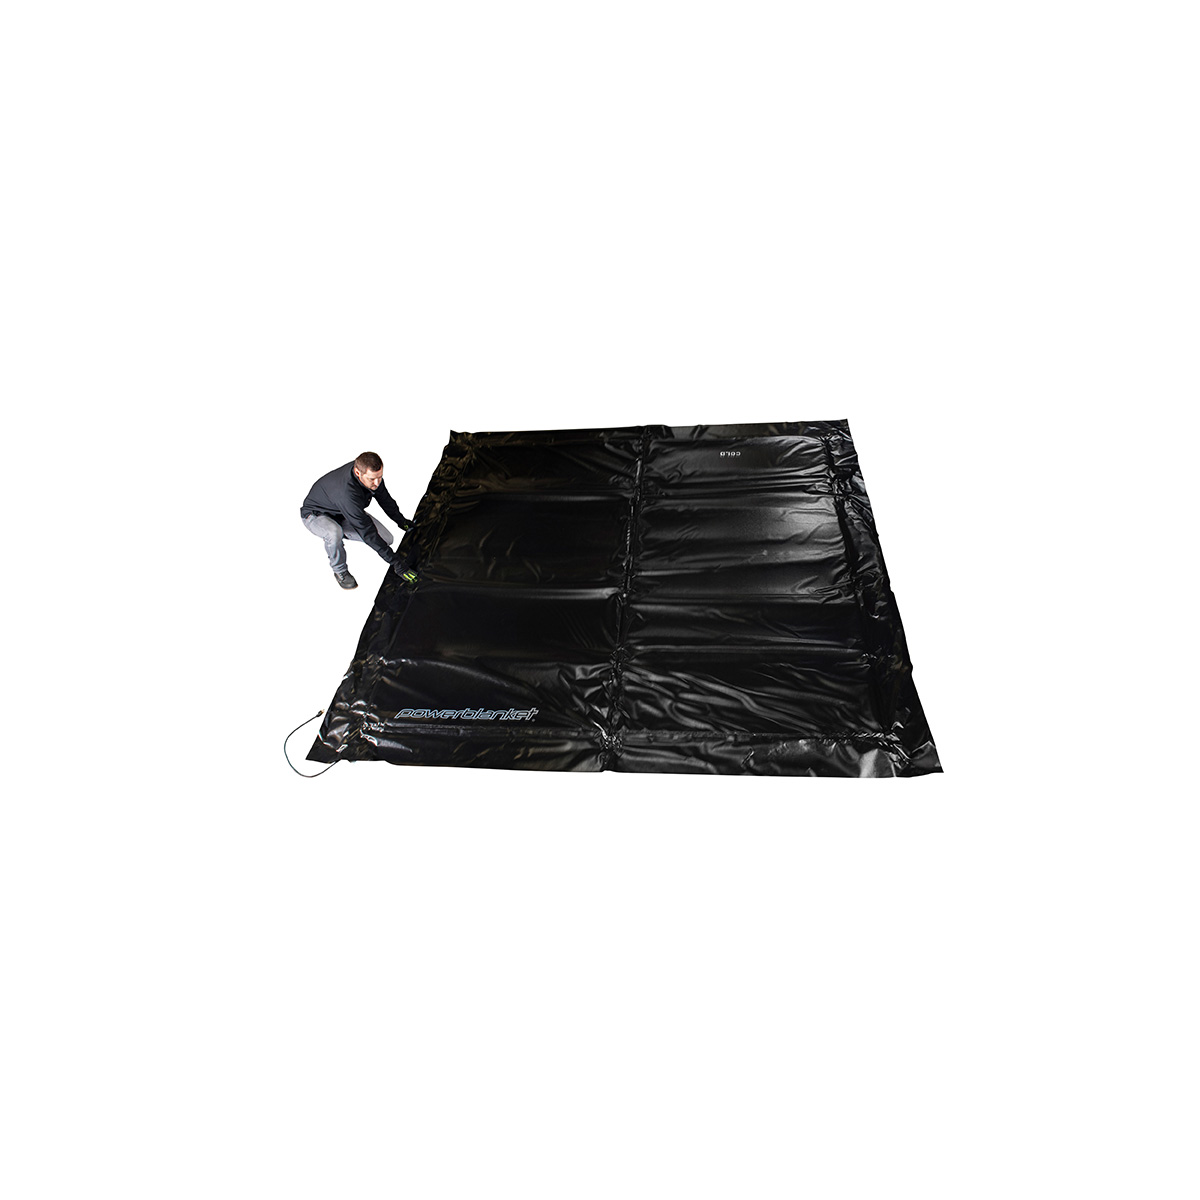 Powerblanket MD1010 Heated Concrete Blanket - 10' x 10' Heated Dimensions - 12' x 12' Finished Dimensions